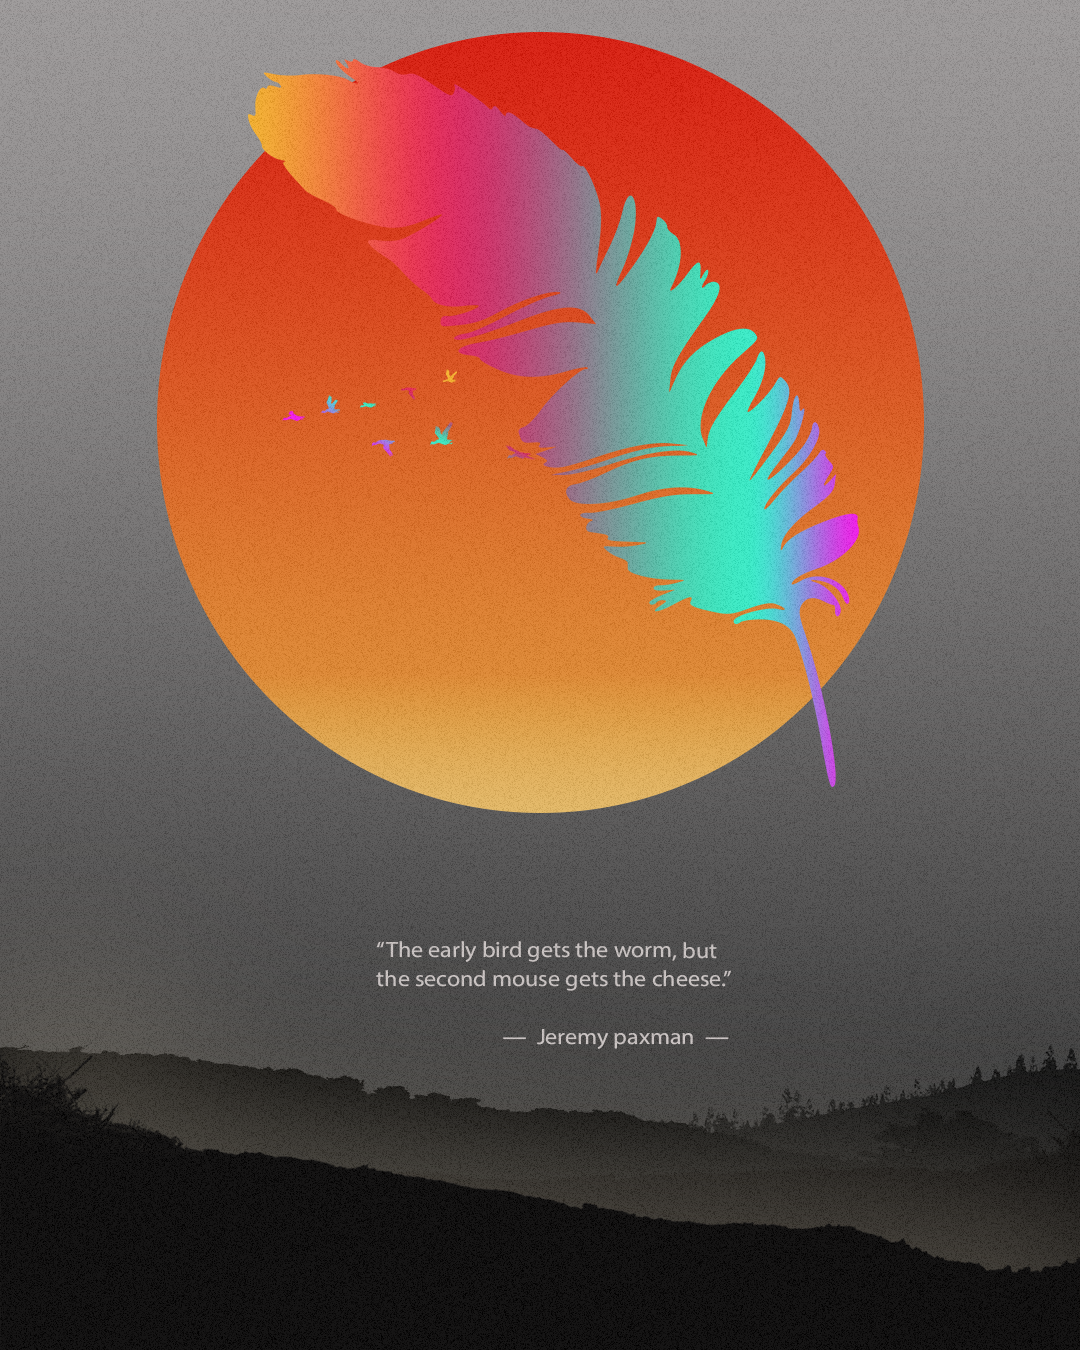 General 1080x1350 gradient feathers quote birds mountains Sun night ridges